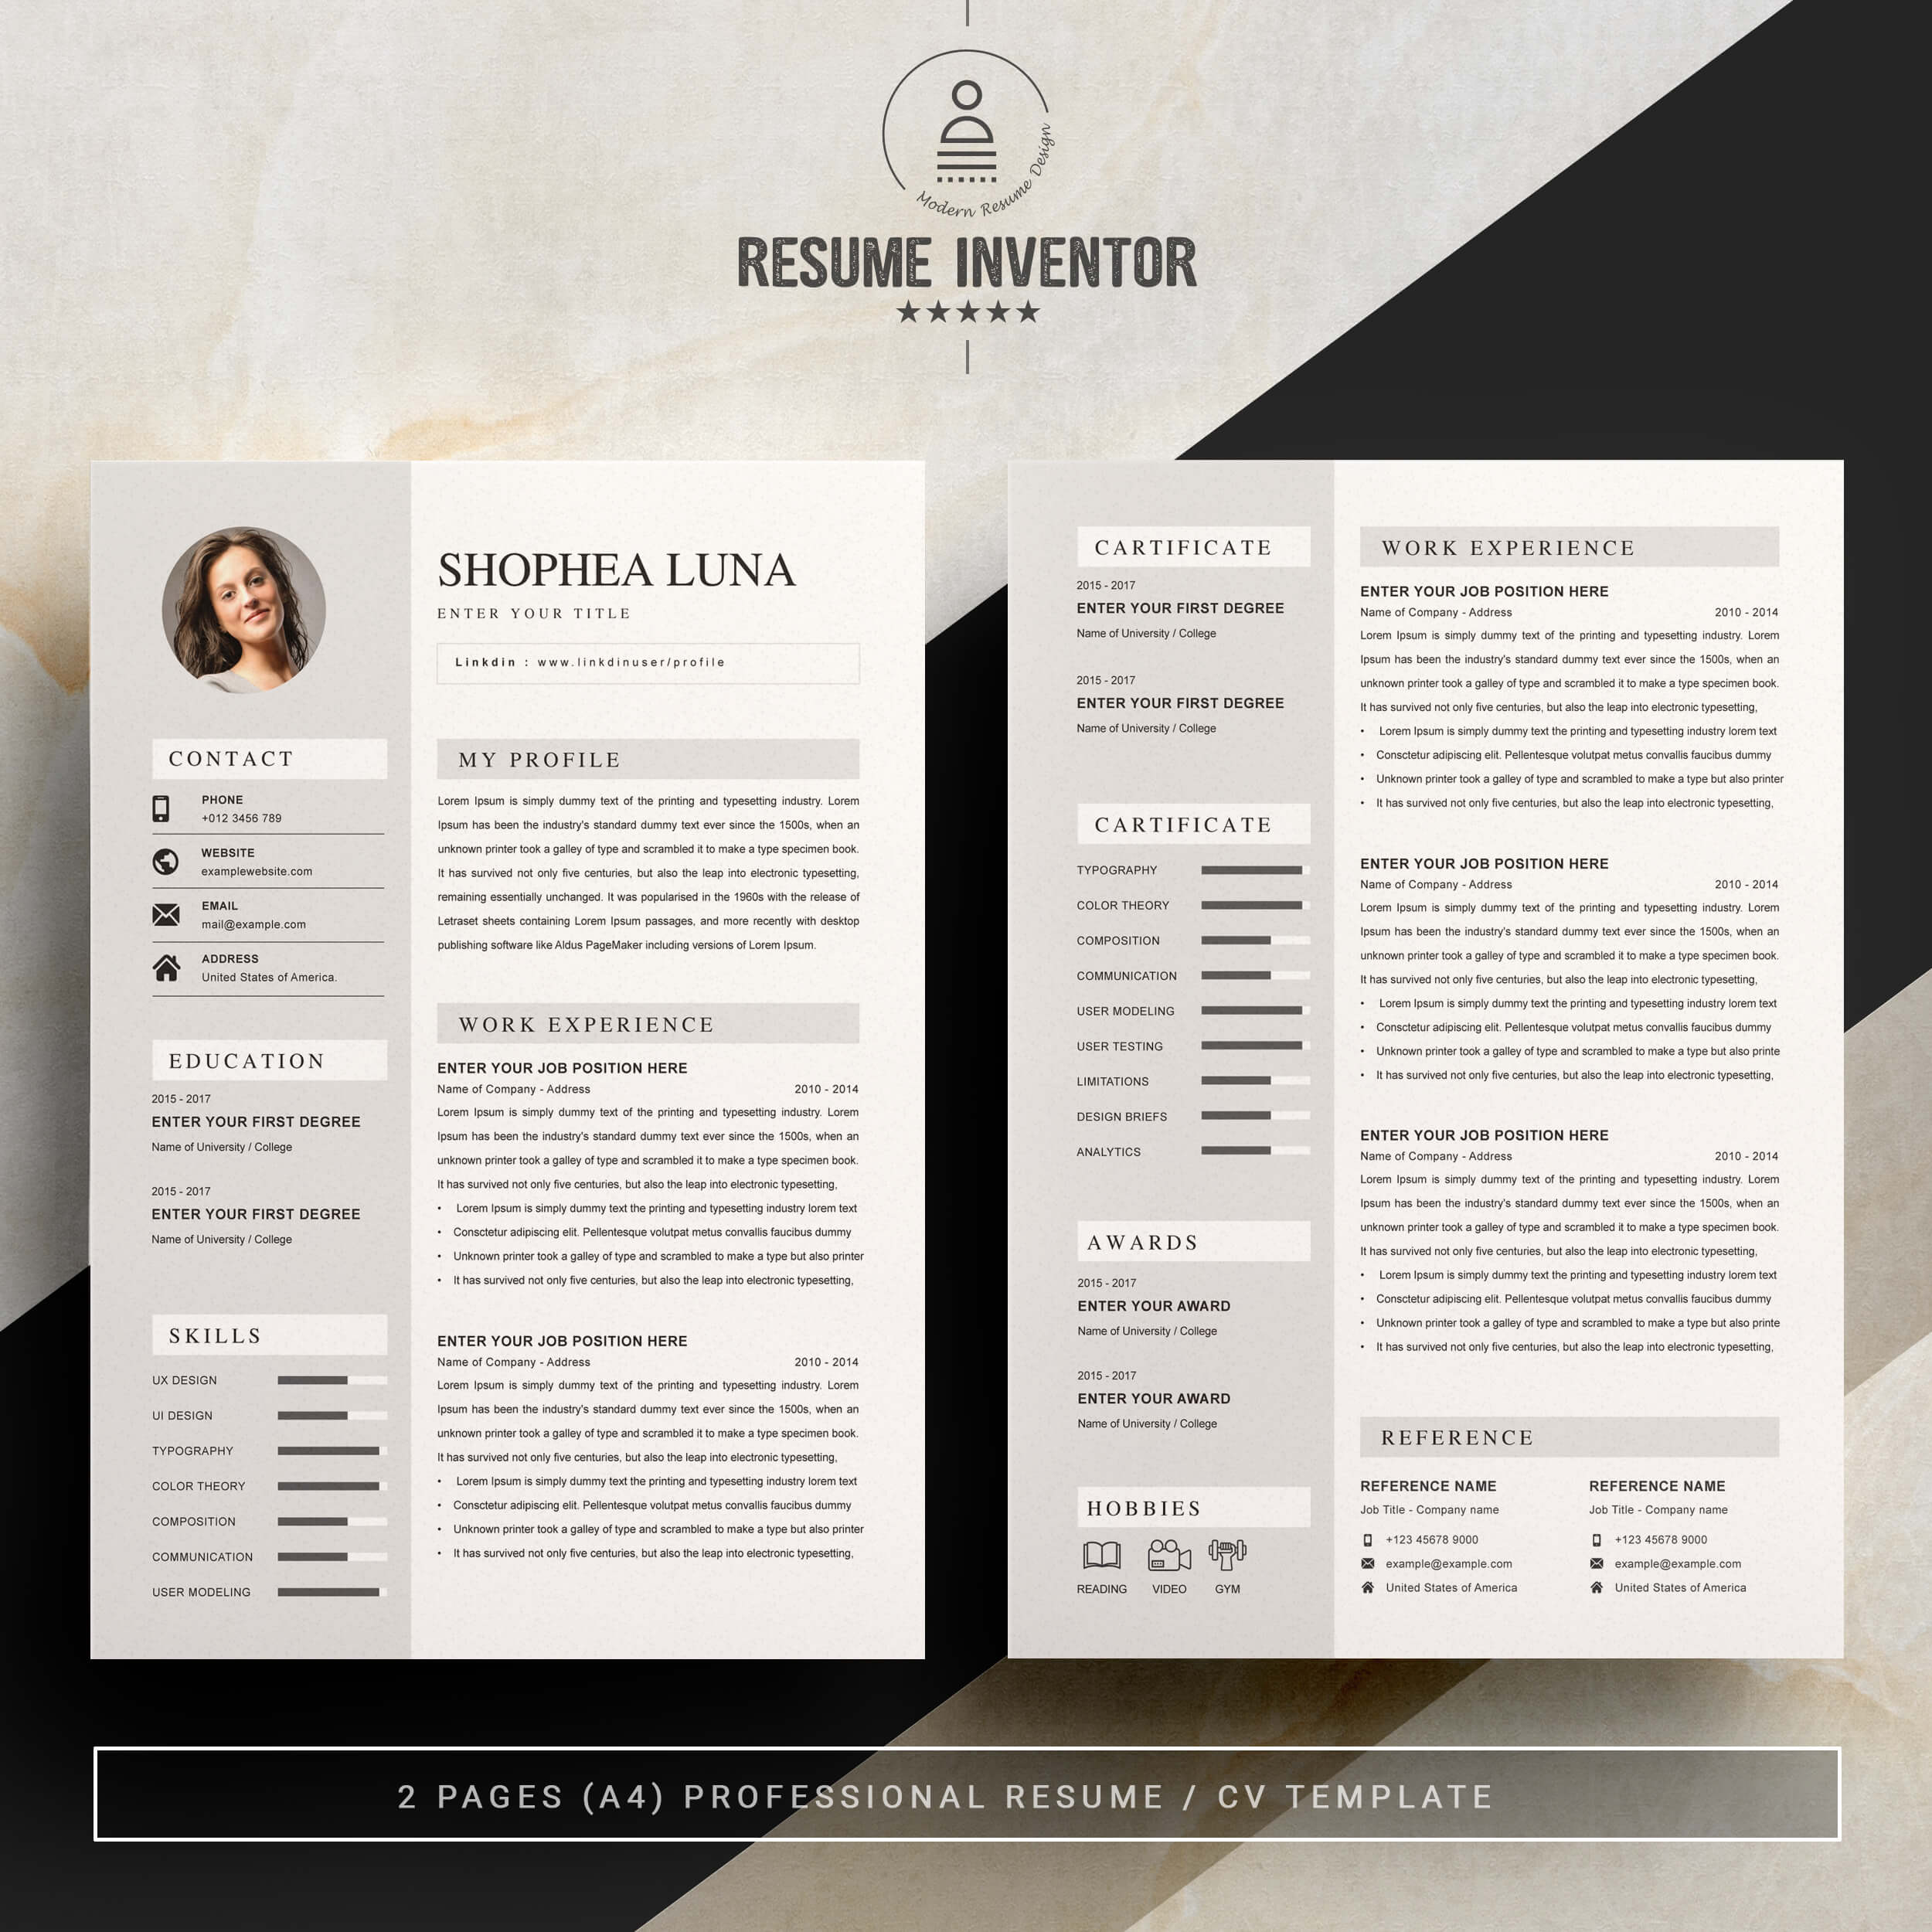 Creative Personal Resume Template | Resume Template With Cover Letter preview image.